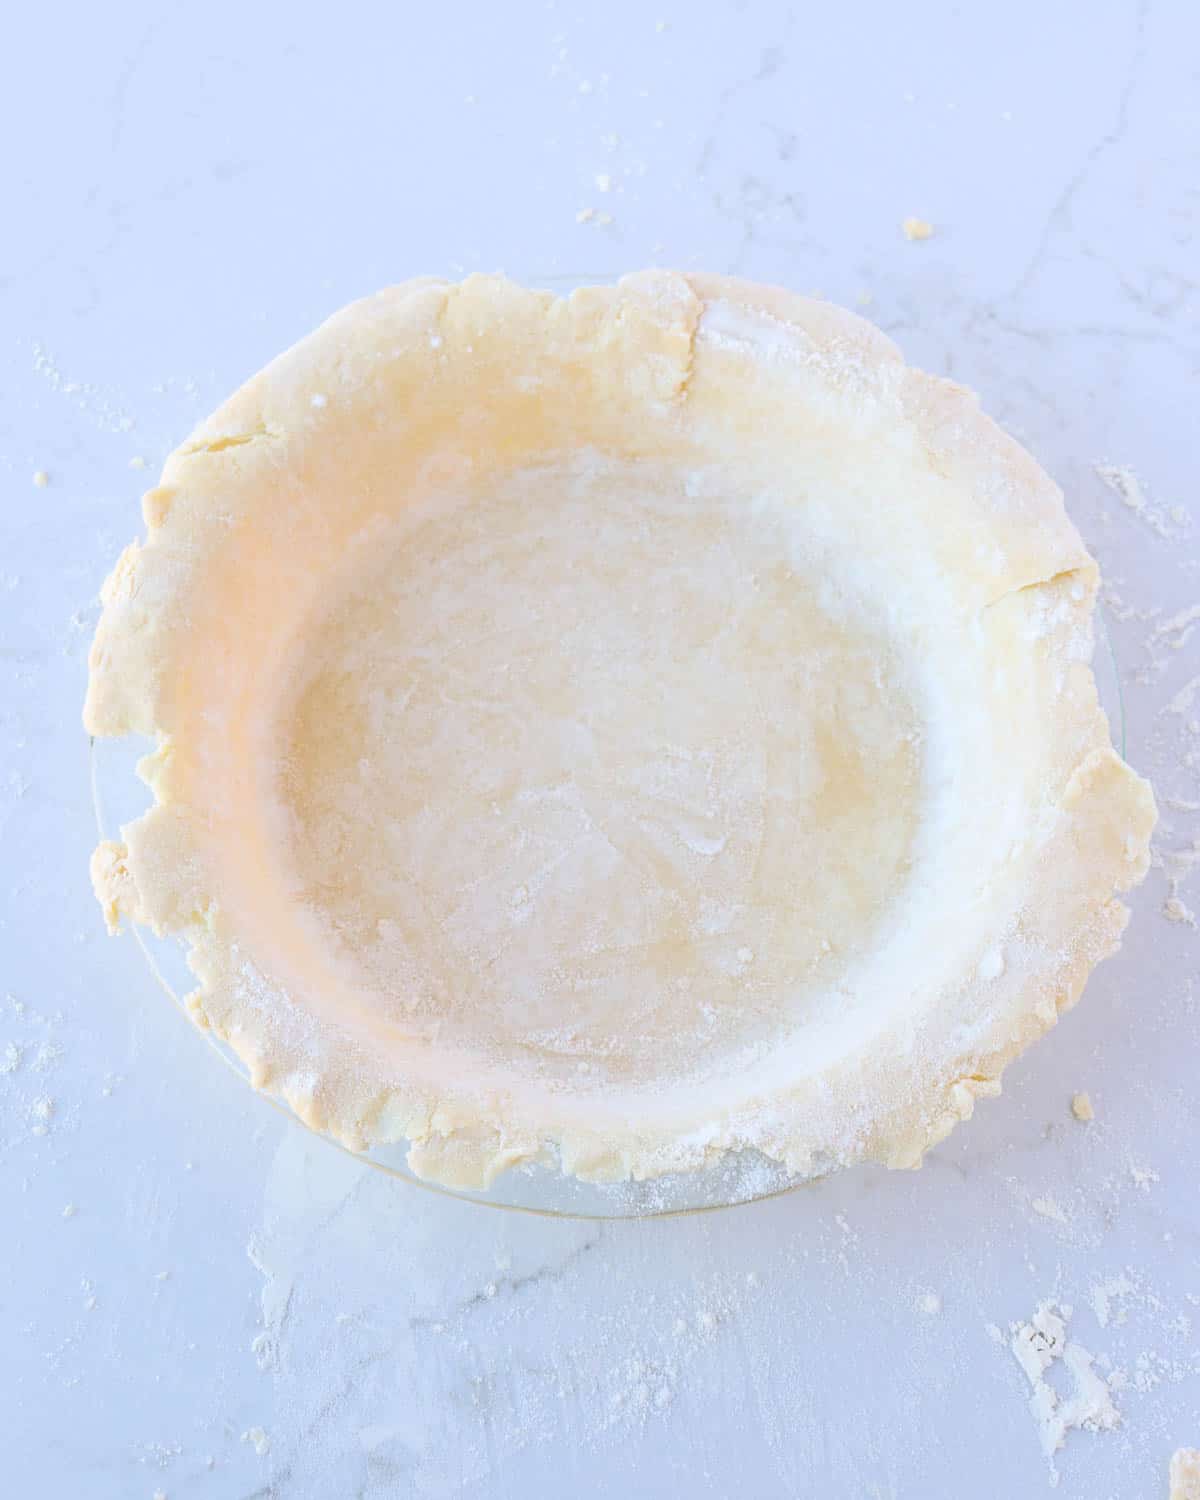 Unbaked pie dough placed in a pie dish.